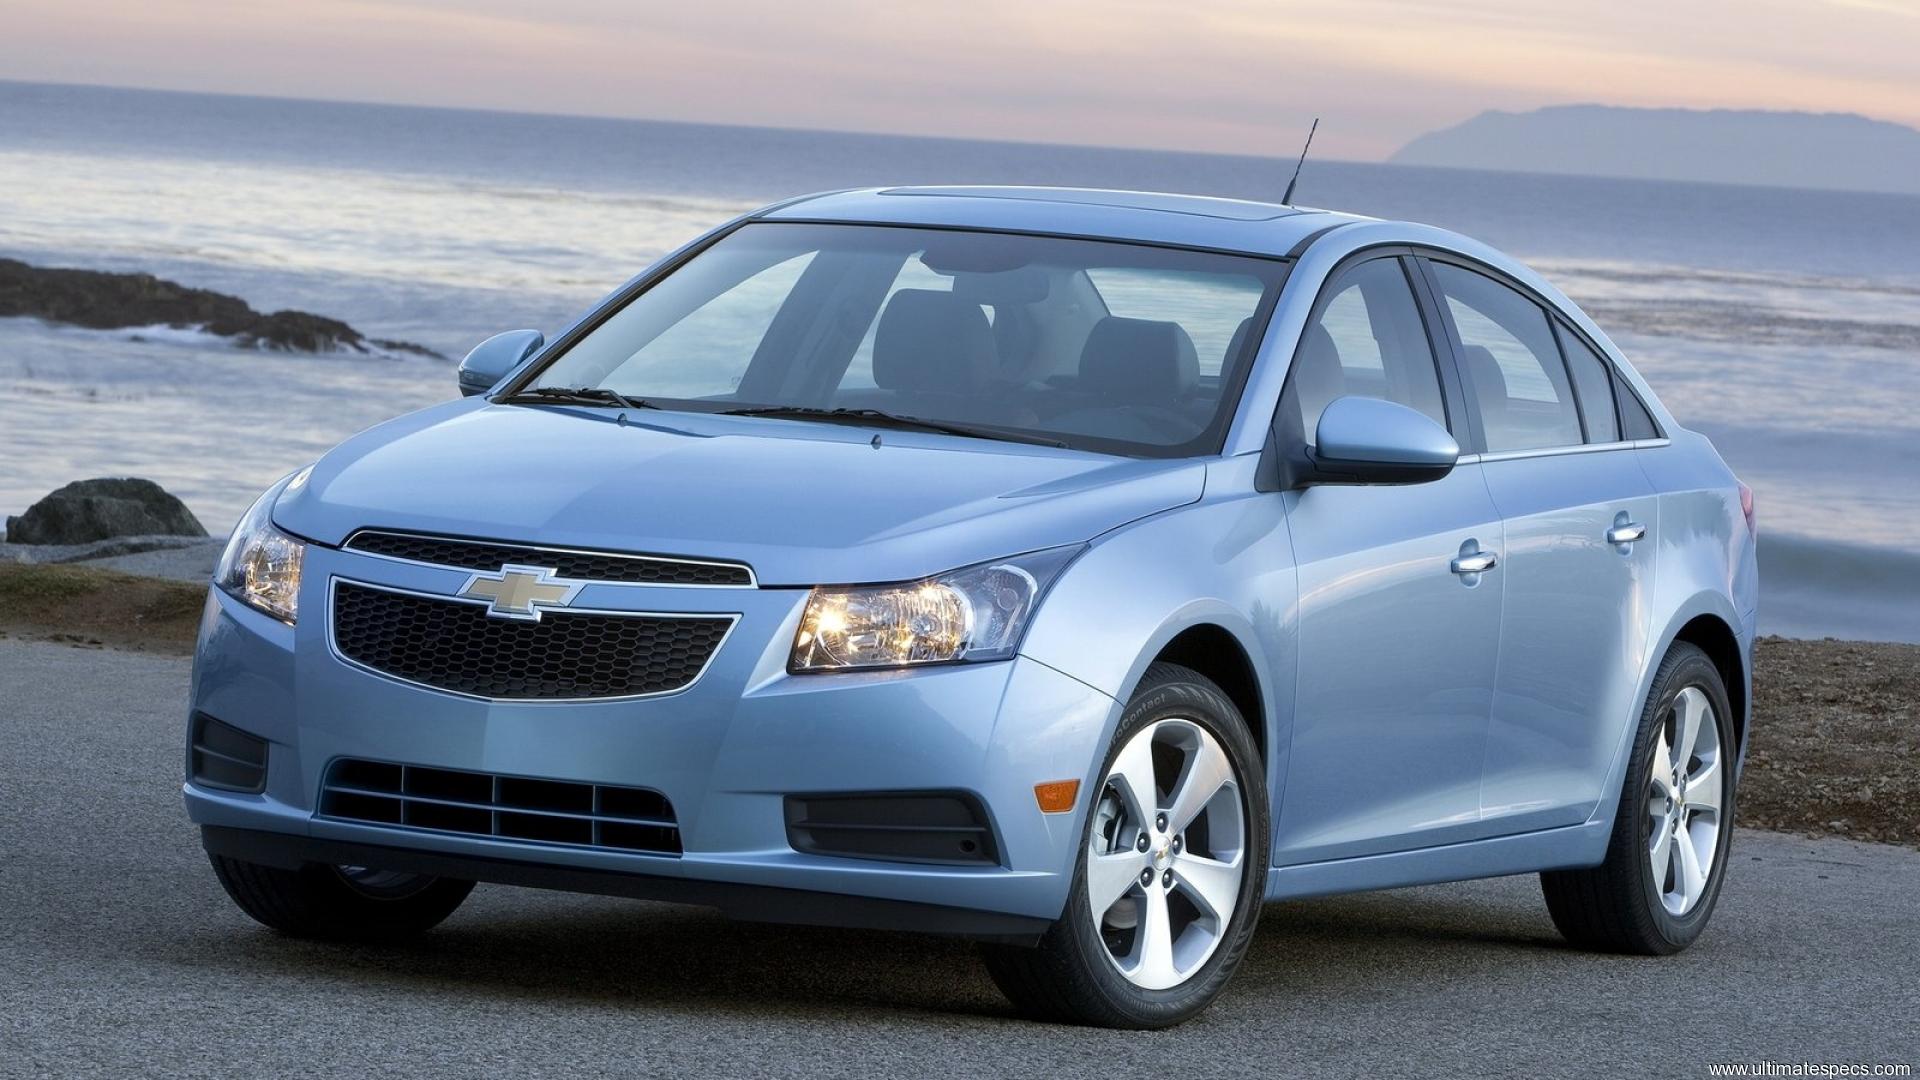 Chevrolet Cruze Images, pictures, gallery